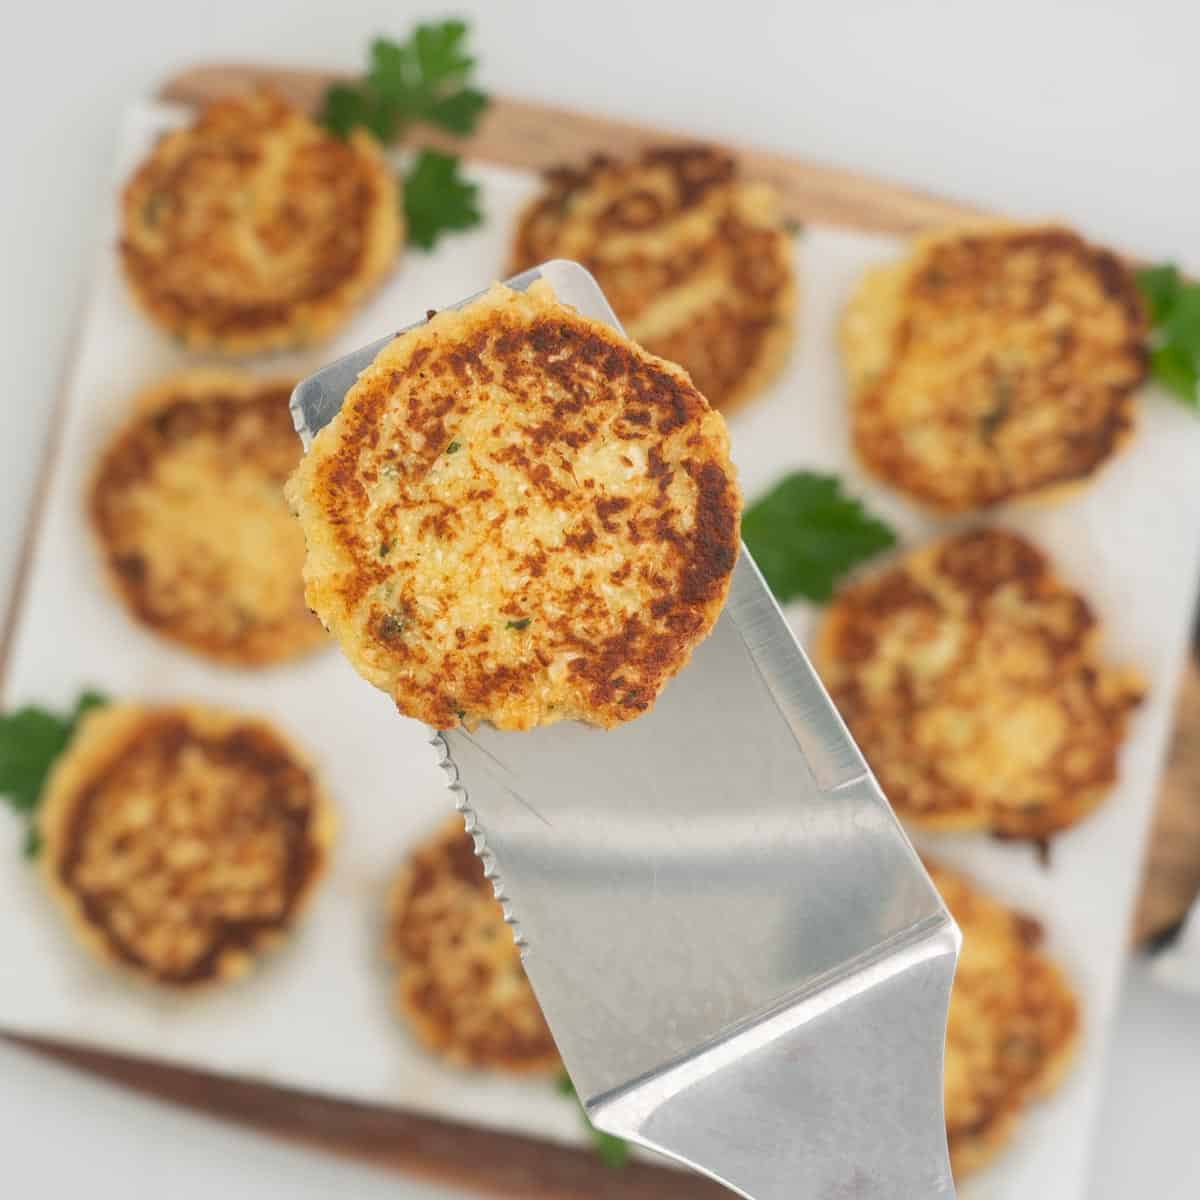 A cauliflower fritter on a stainless steel spatula being held above a platter of fritters.